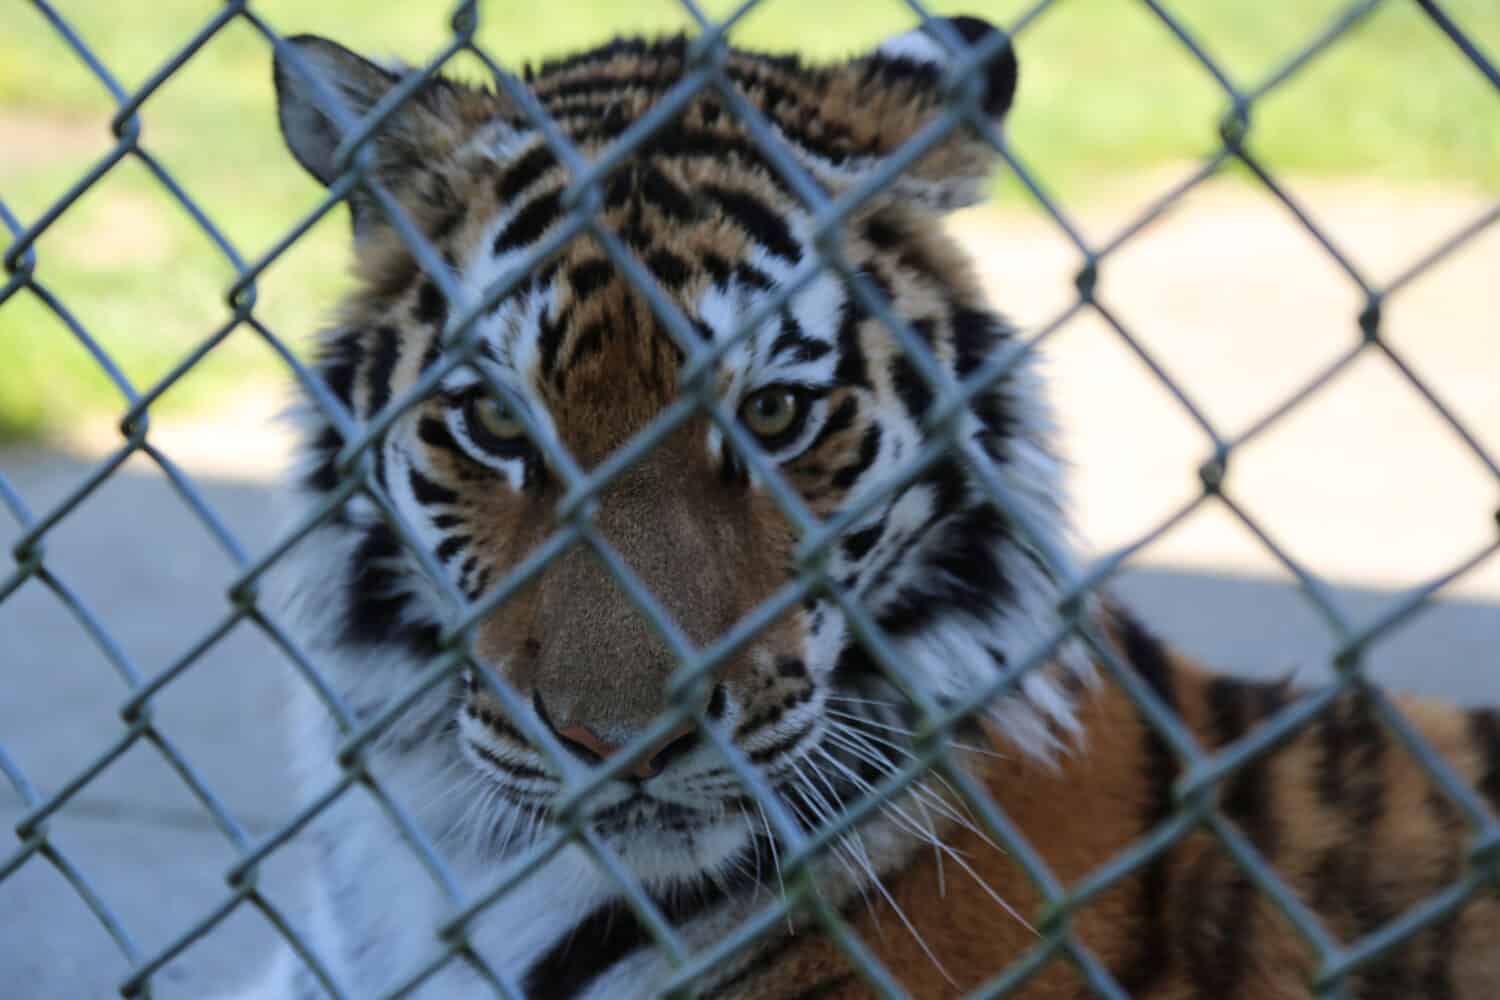 A tiger rests behind a wire fence at the Greater Vancouver Zoo in Abbotsford, British Columbia Canada. 